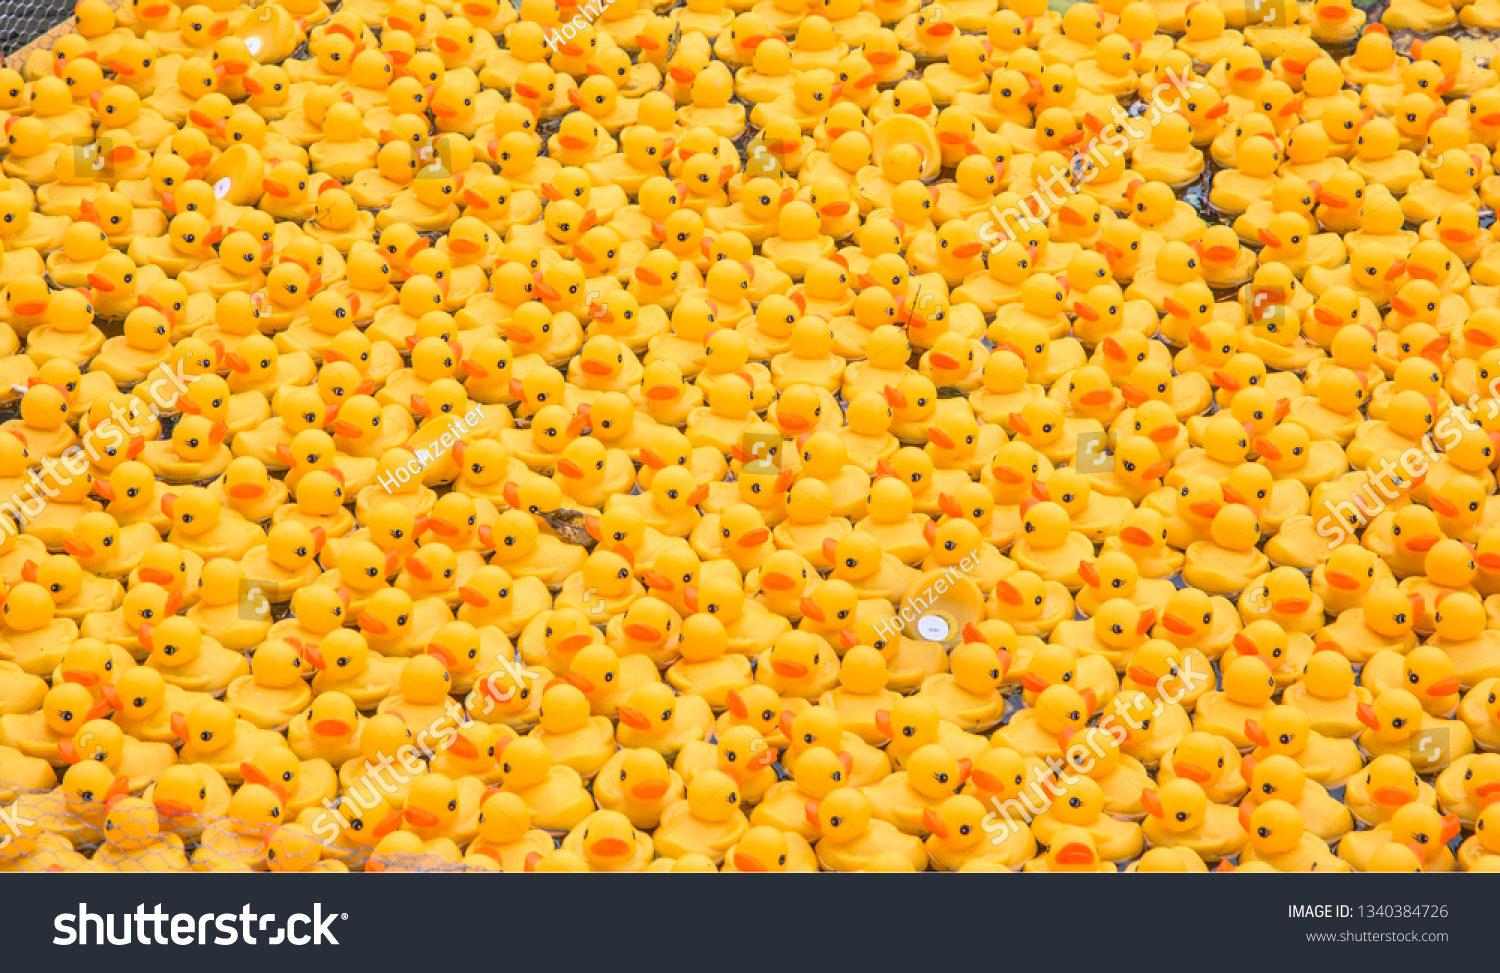 Hundreds of yellow plastic ducks with red spouts are swimming in the water somewhere. It looks like to be a big team event and most of the participants are heading to the right direction.  #1340384726